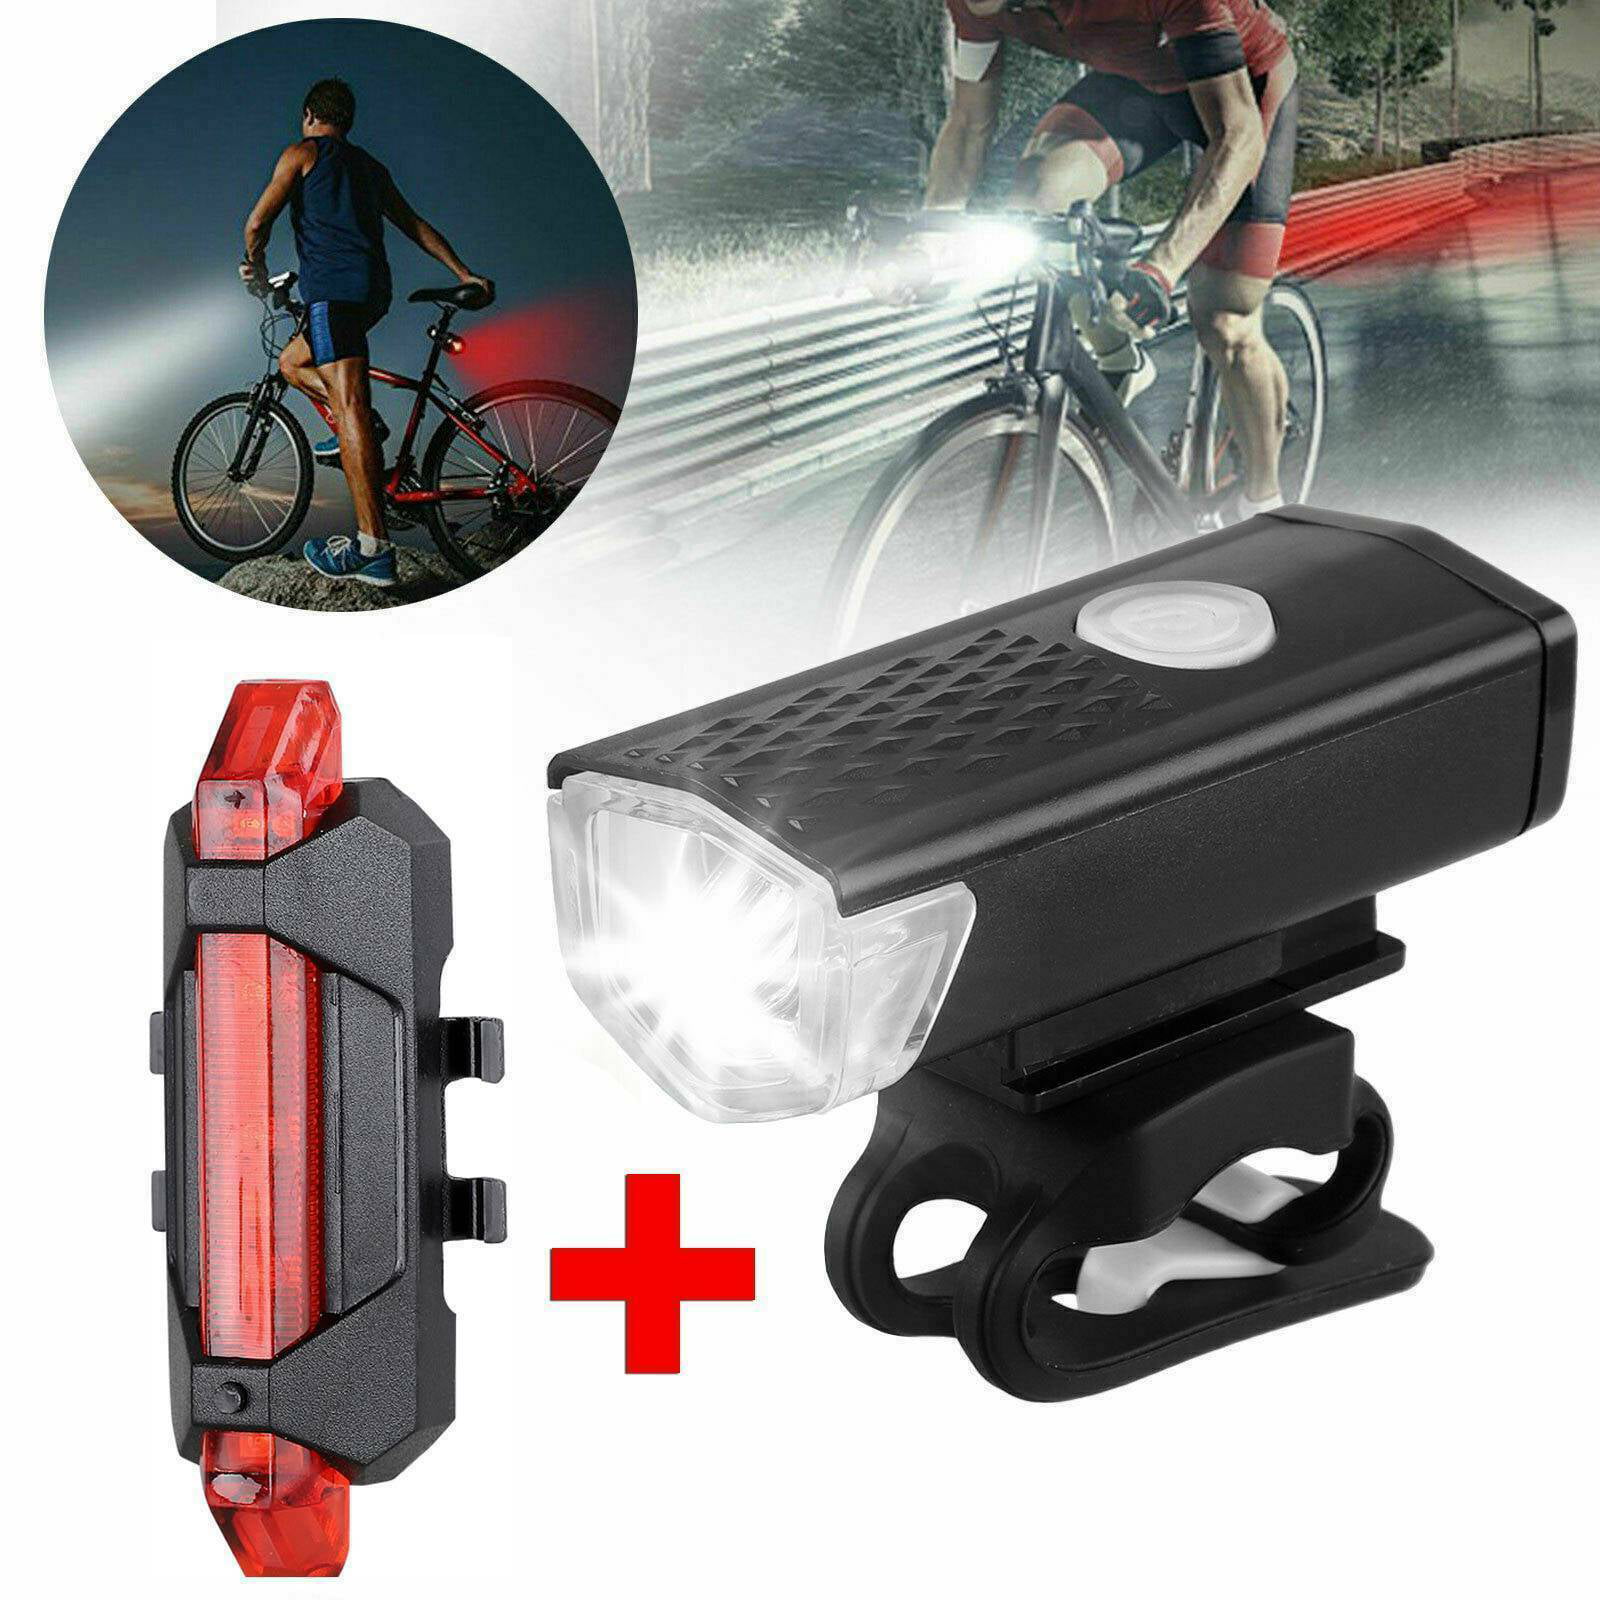 LED Bike Headlight Bicycle Head Light Front Lamp Cycling Black USB Rechargeable